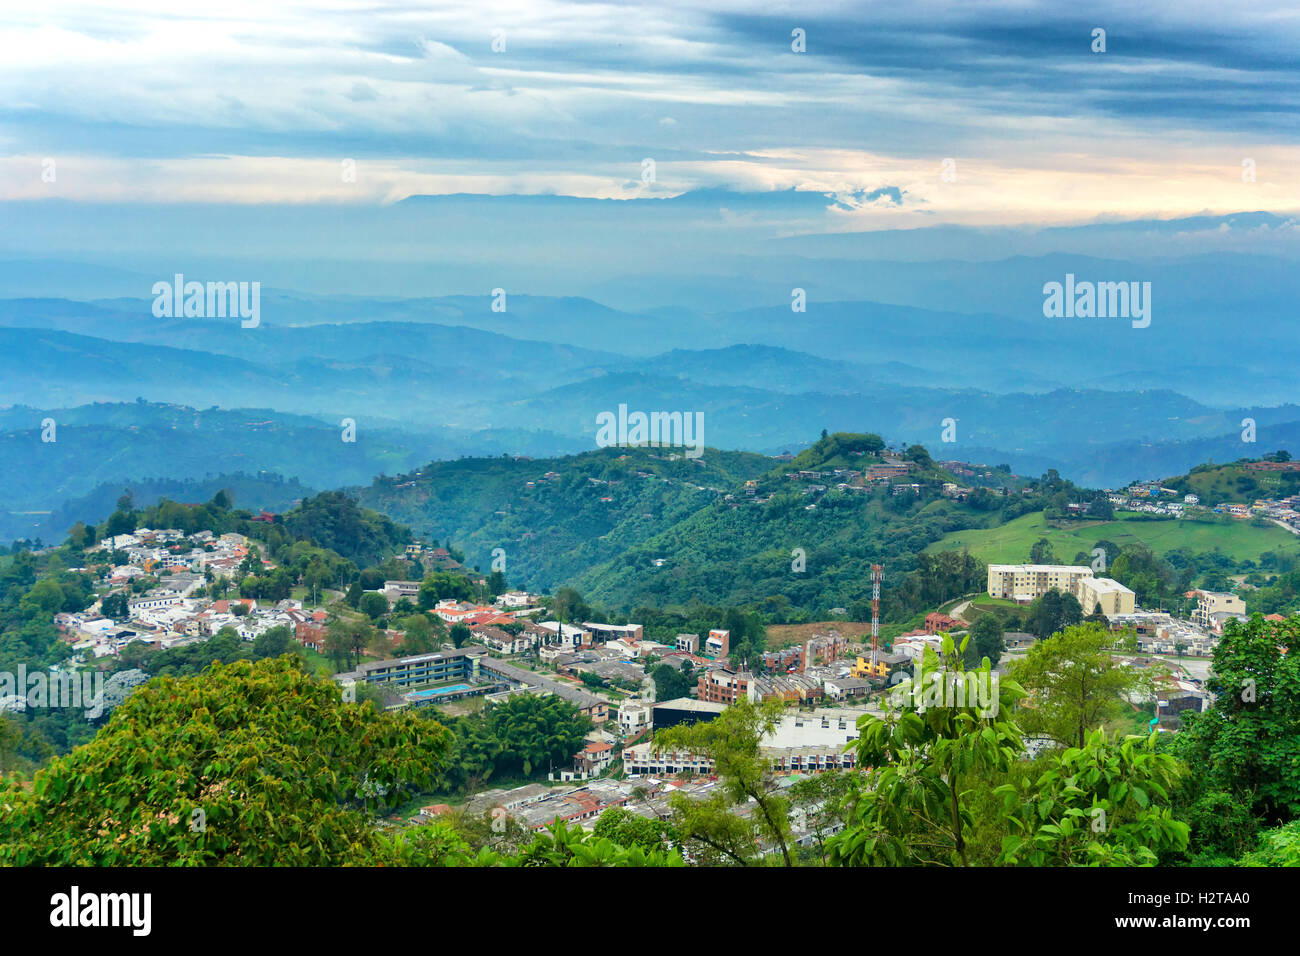 View of Manizales and rolling hills landscape in Colombia Stock Photo